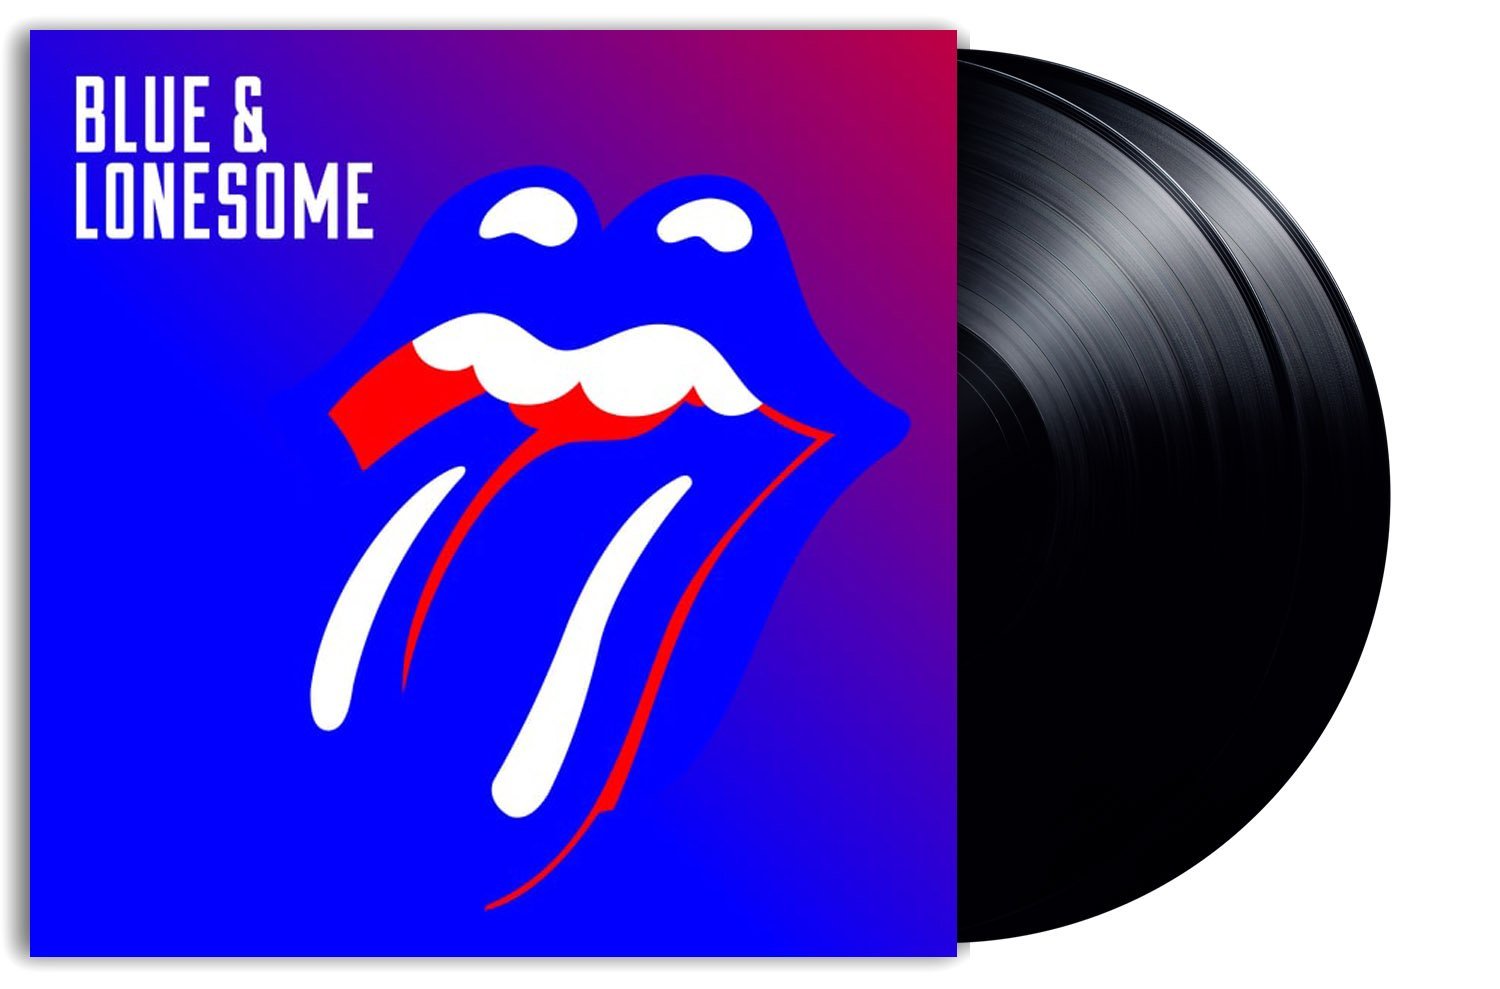 Blue & Lonesome - Vinyl | The Rolling Stones